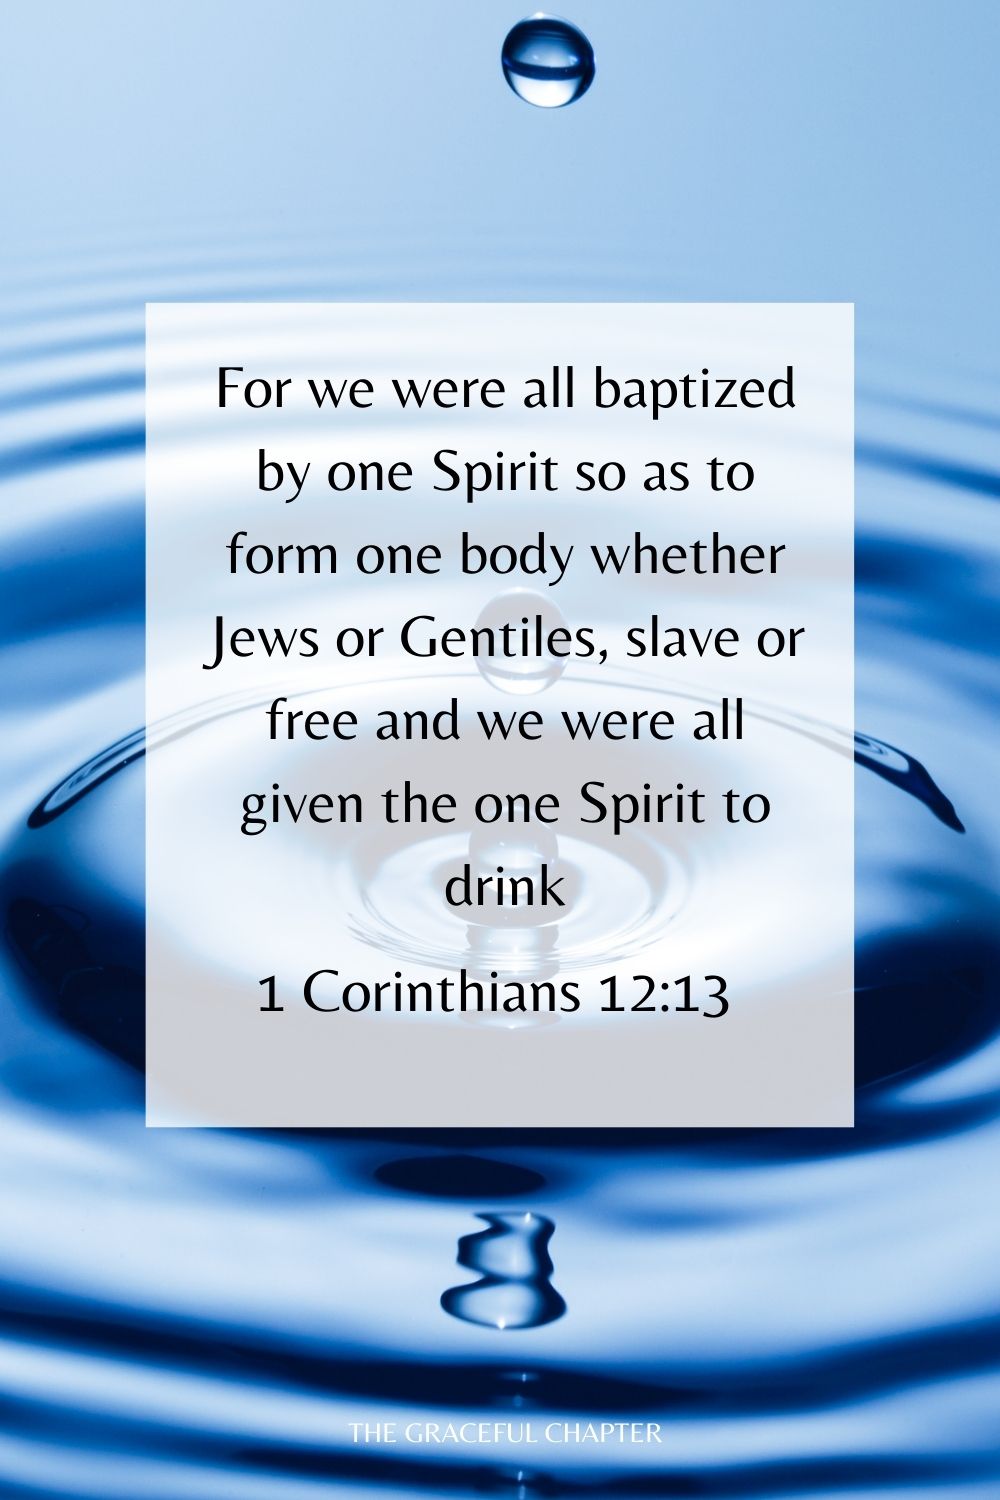 For we were all baptized by one Spirit so as to form one body whether Jews or Gentiles, slave or free and we were all given the one Spirit to drink. 1 Corinthians 12:13